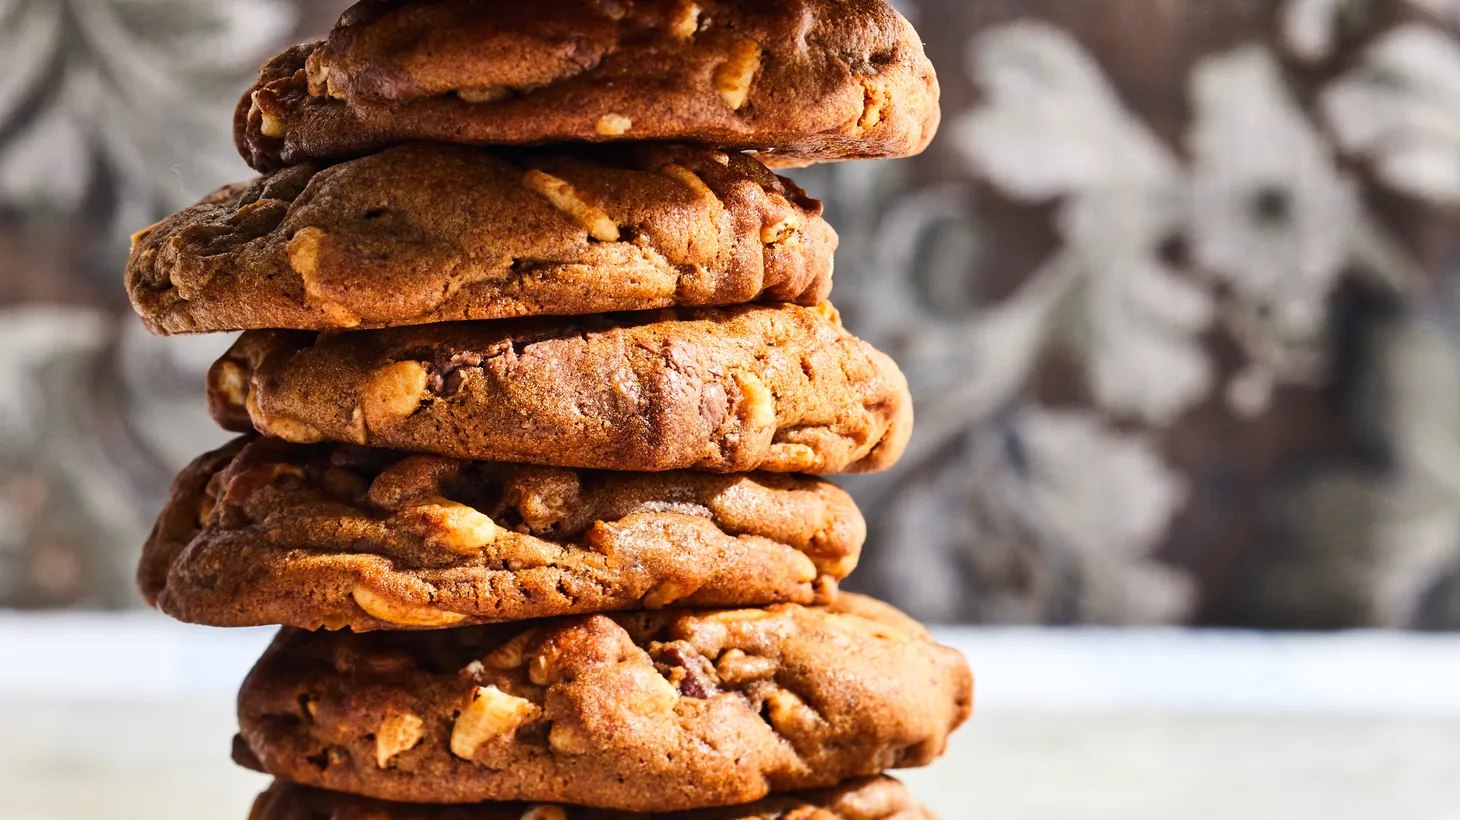 This gluten-free cookie uses rice flour and lets you add anything from warm spices to chocolate chips and nuts.